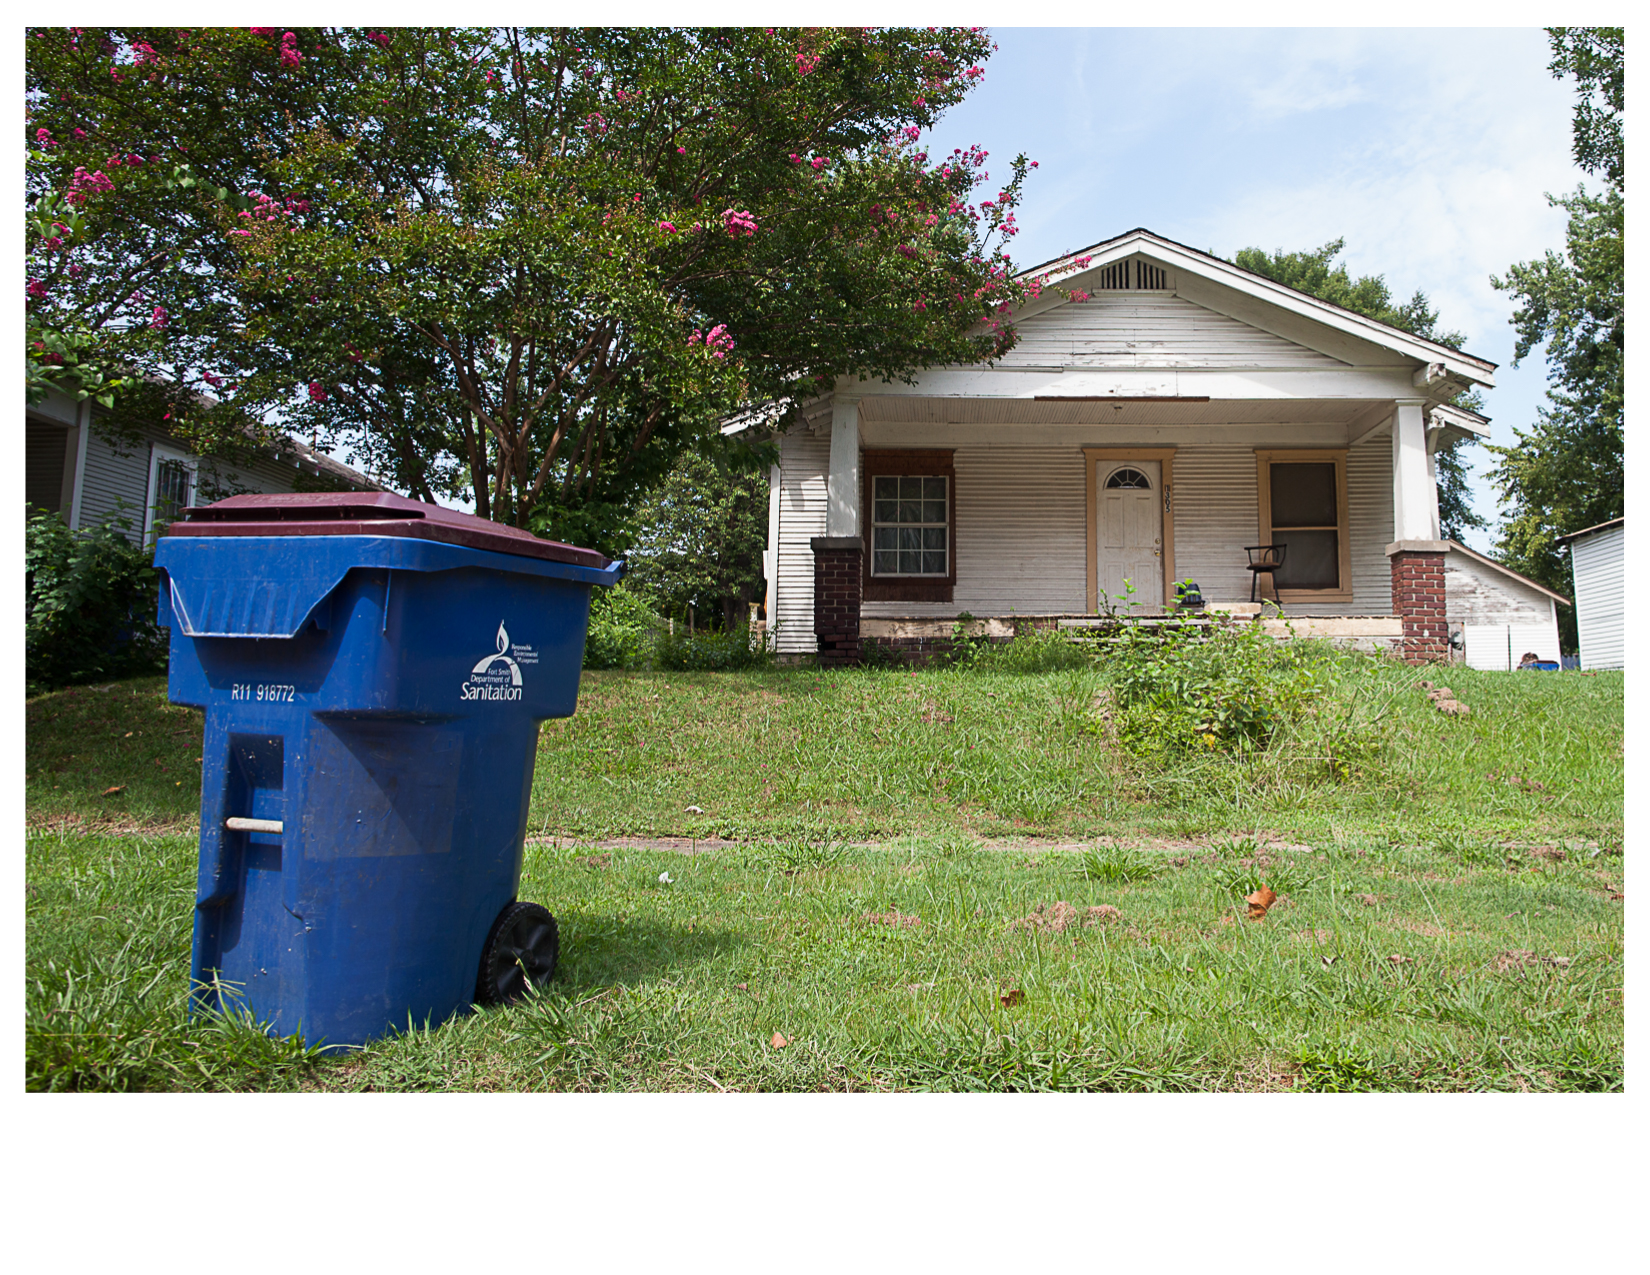 Trash Bin and House, North 33rd Street, Fort Smith, AR